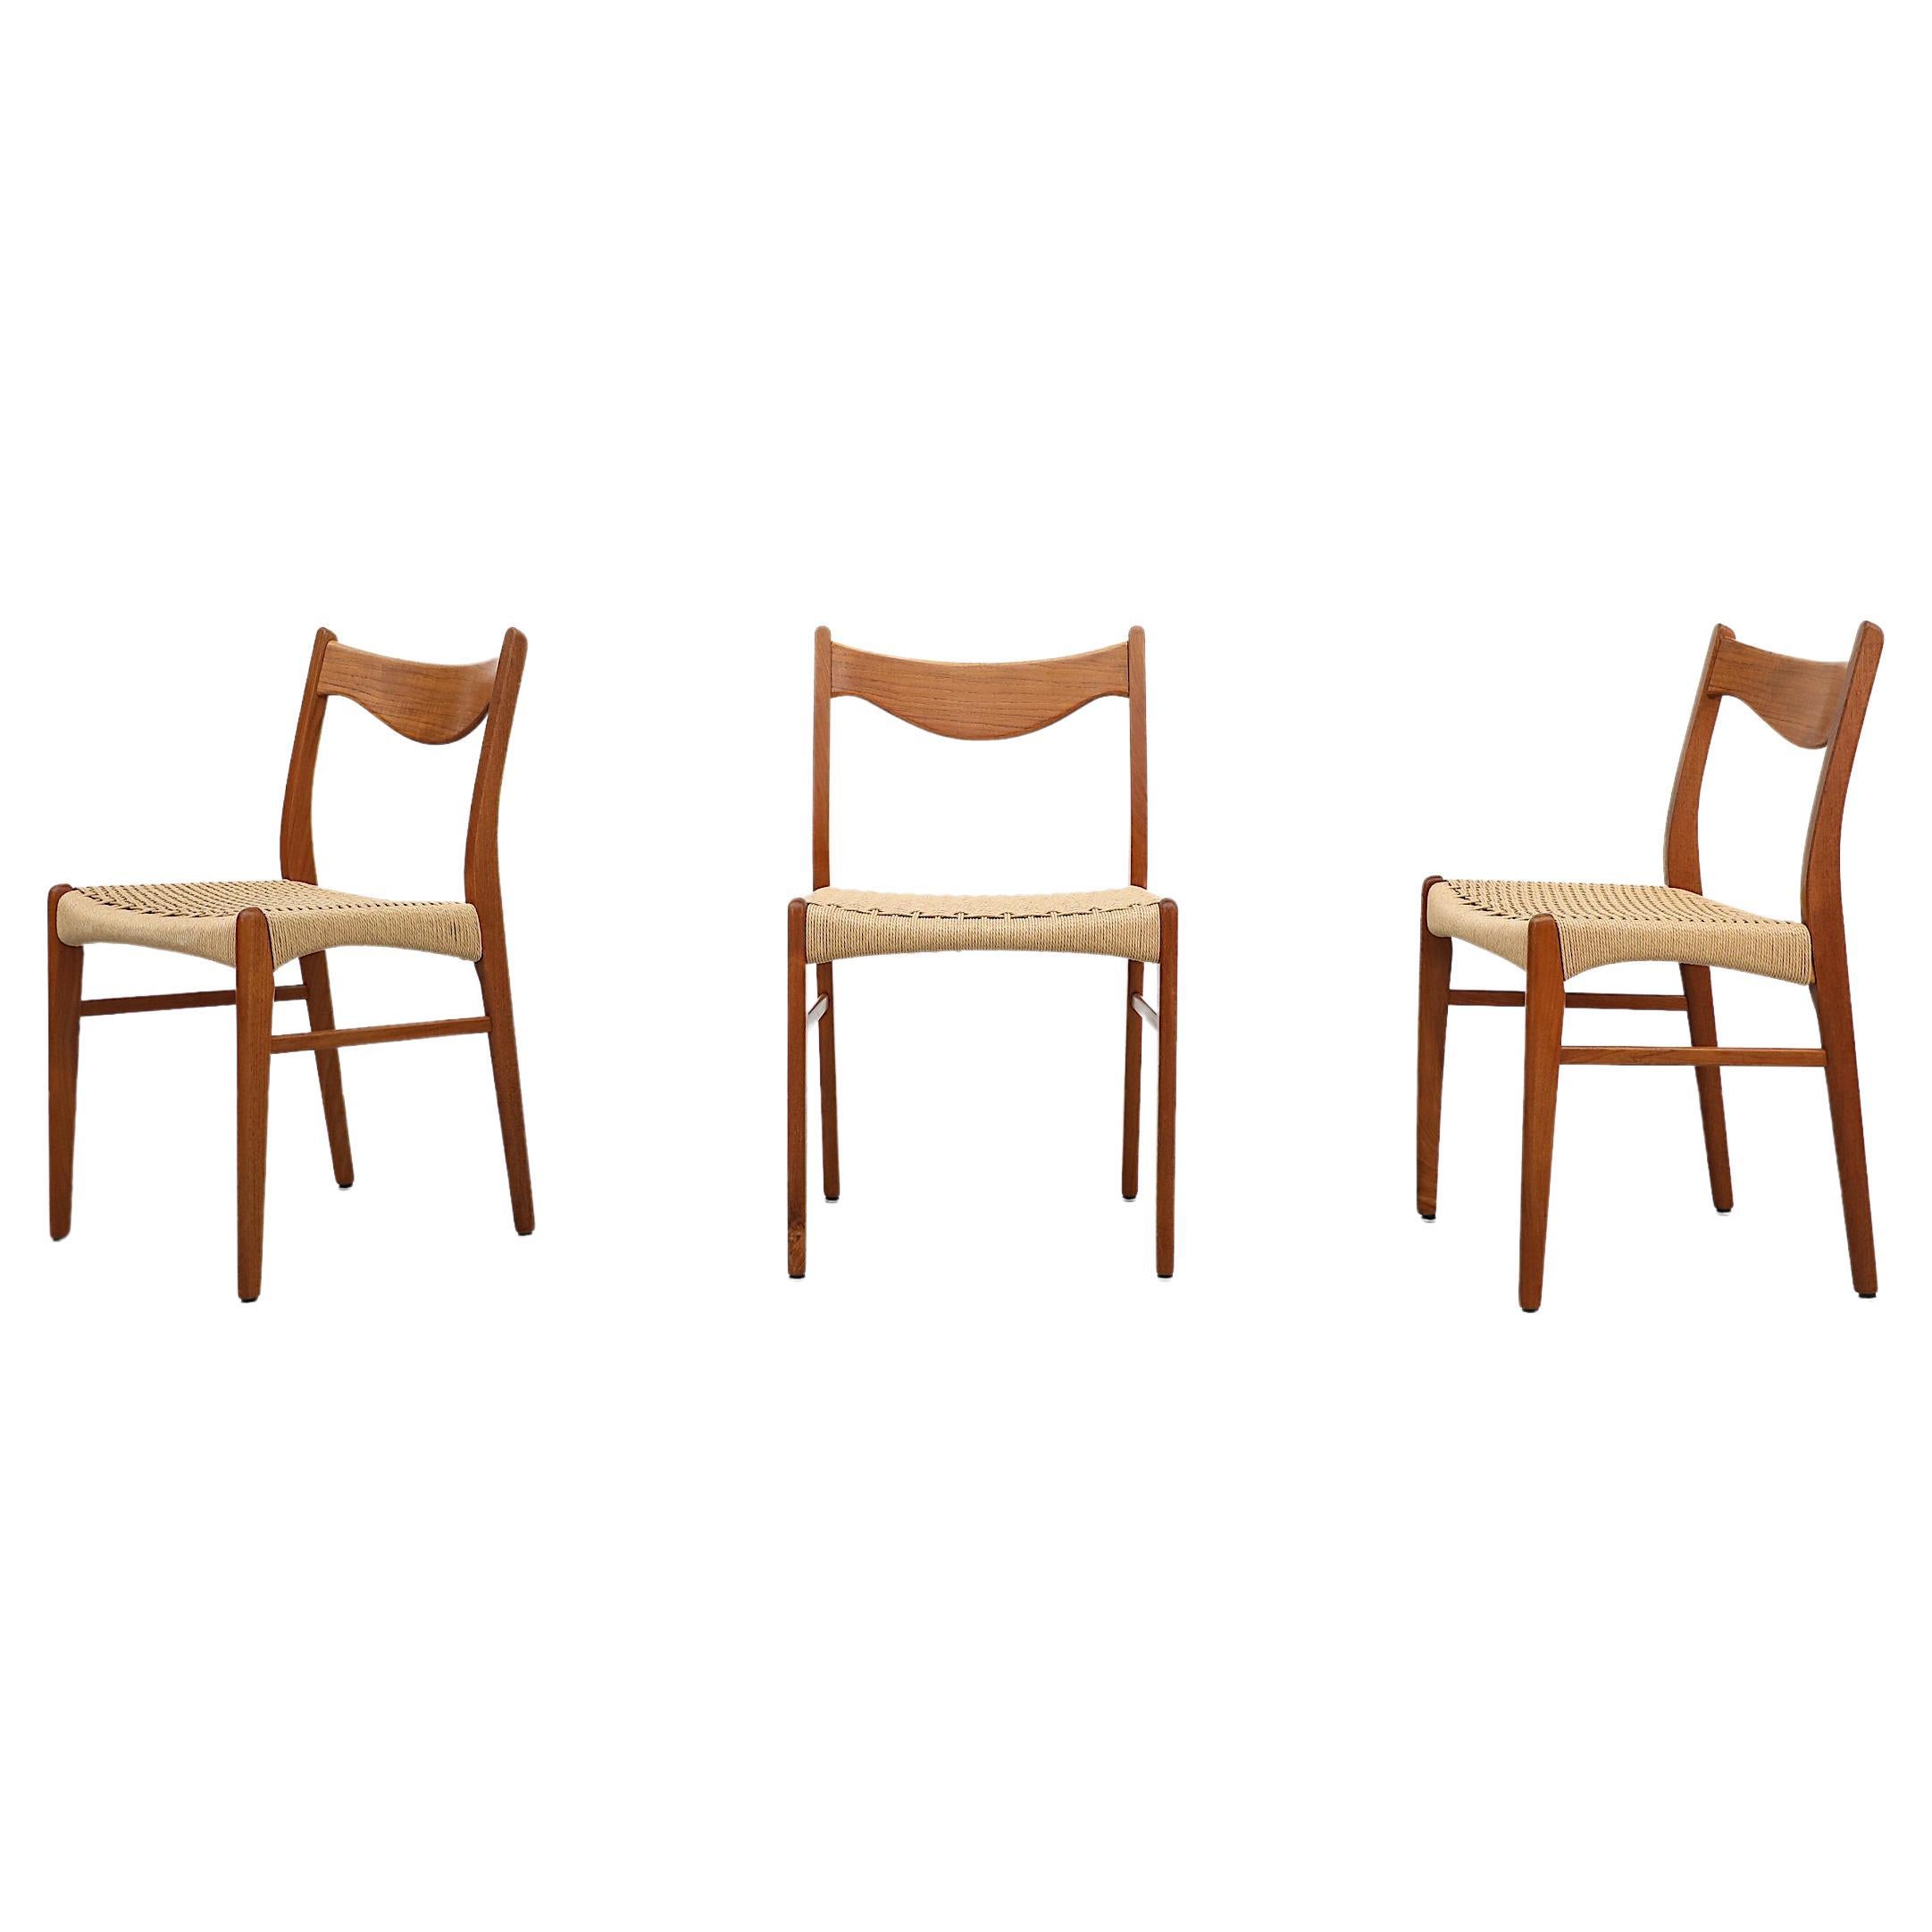 Mid-Century Danish Teak Side Chair by Arne Wahl Iversen for Glyngøre, 1960s For Sale